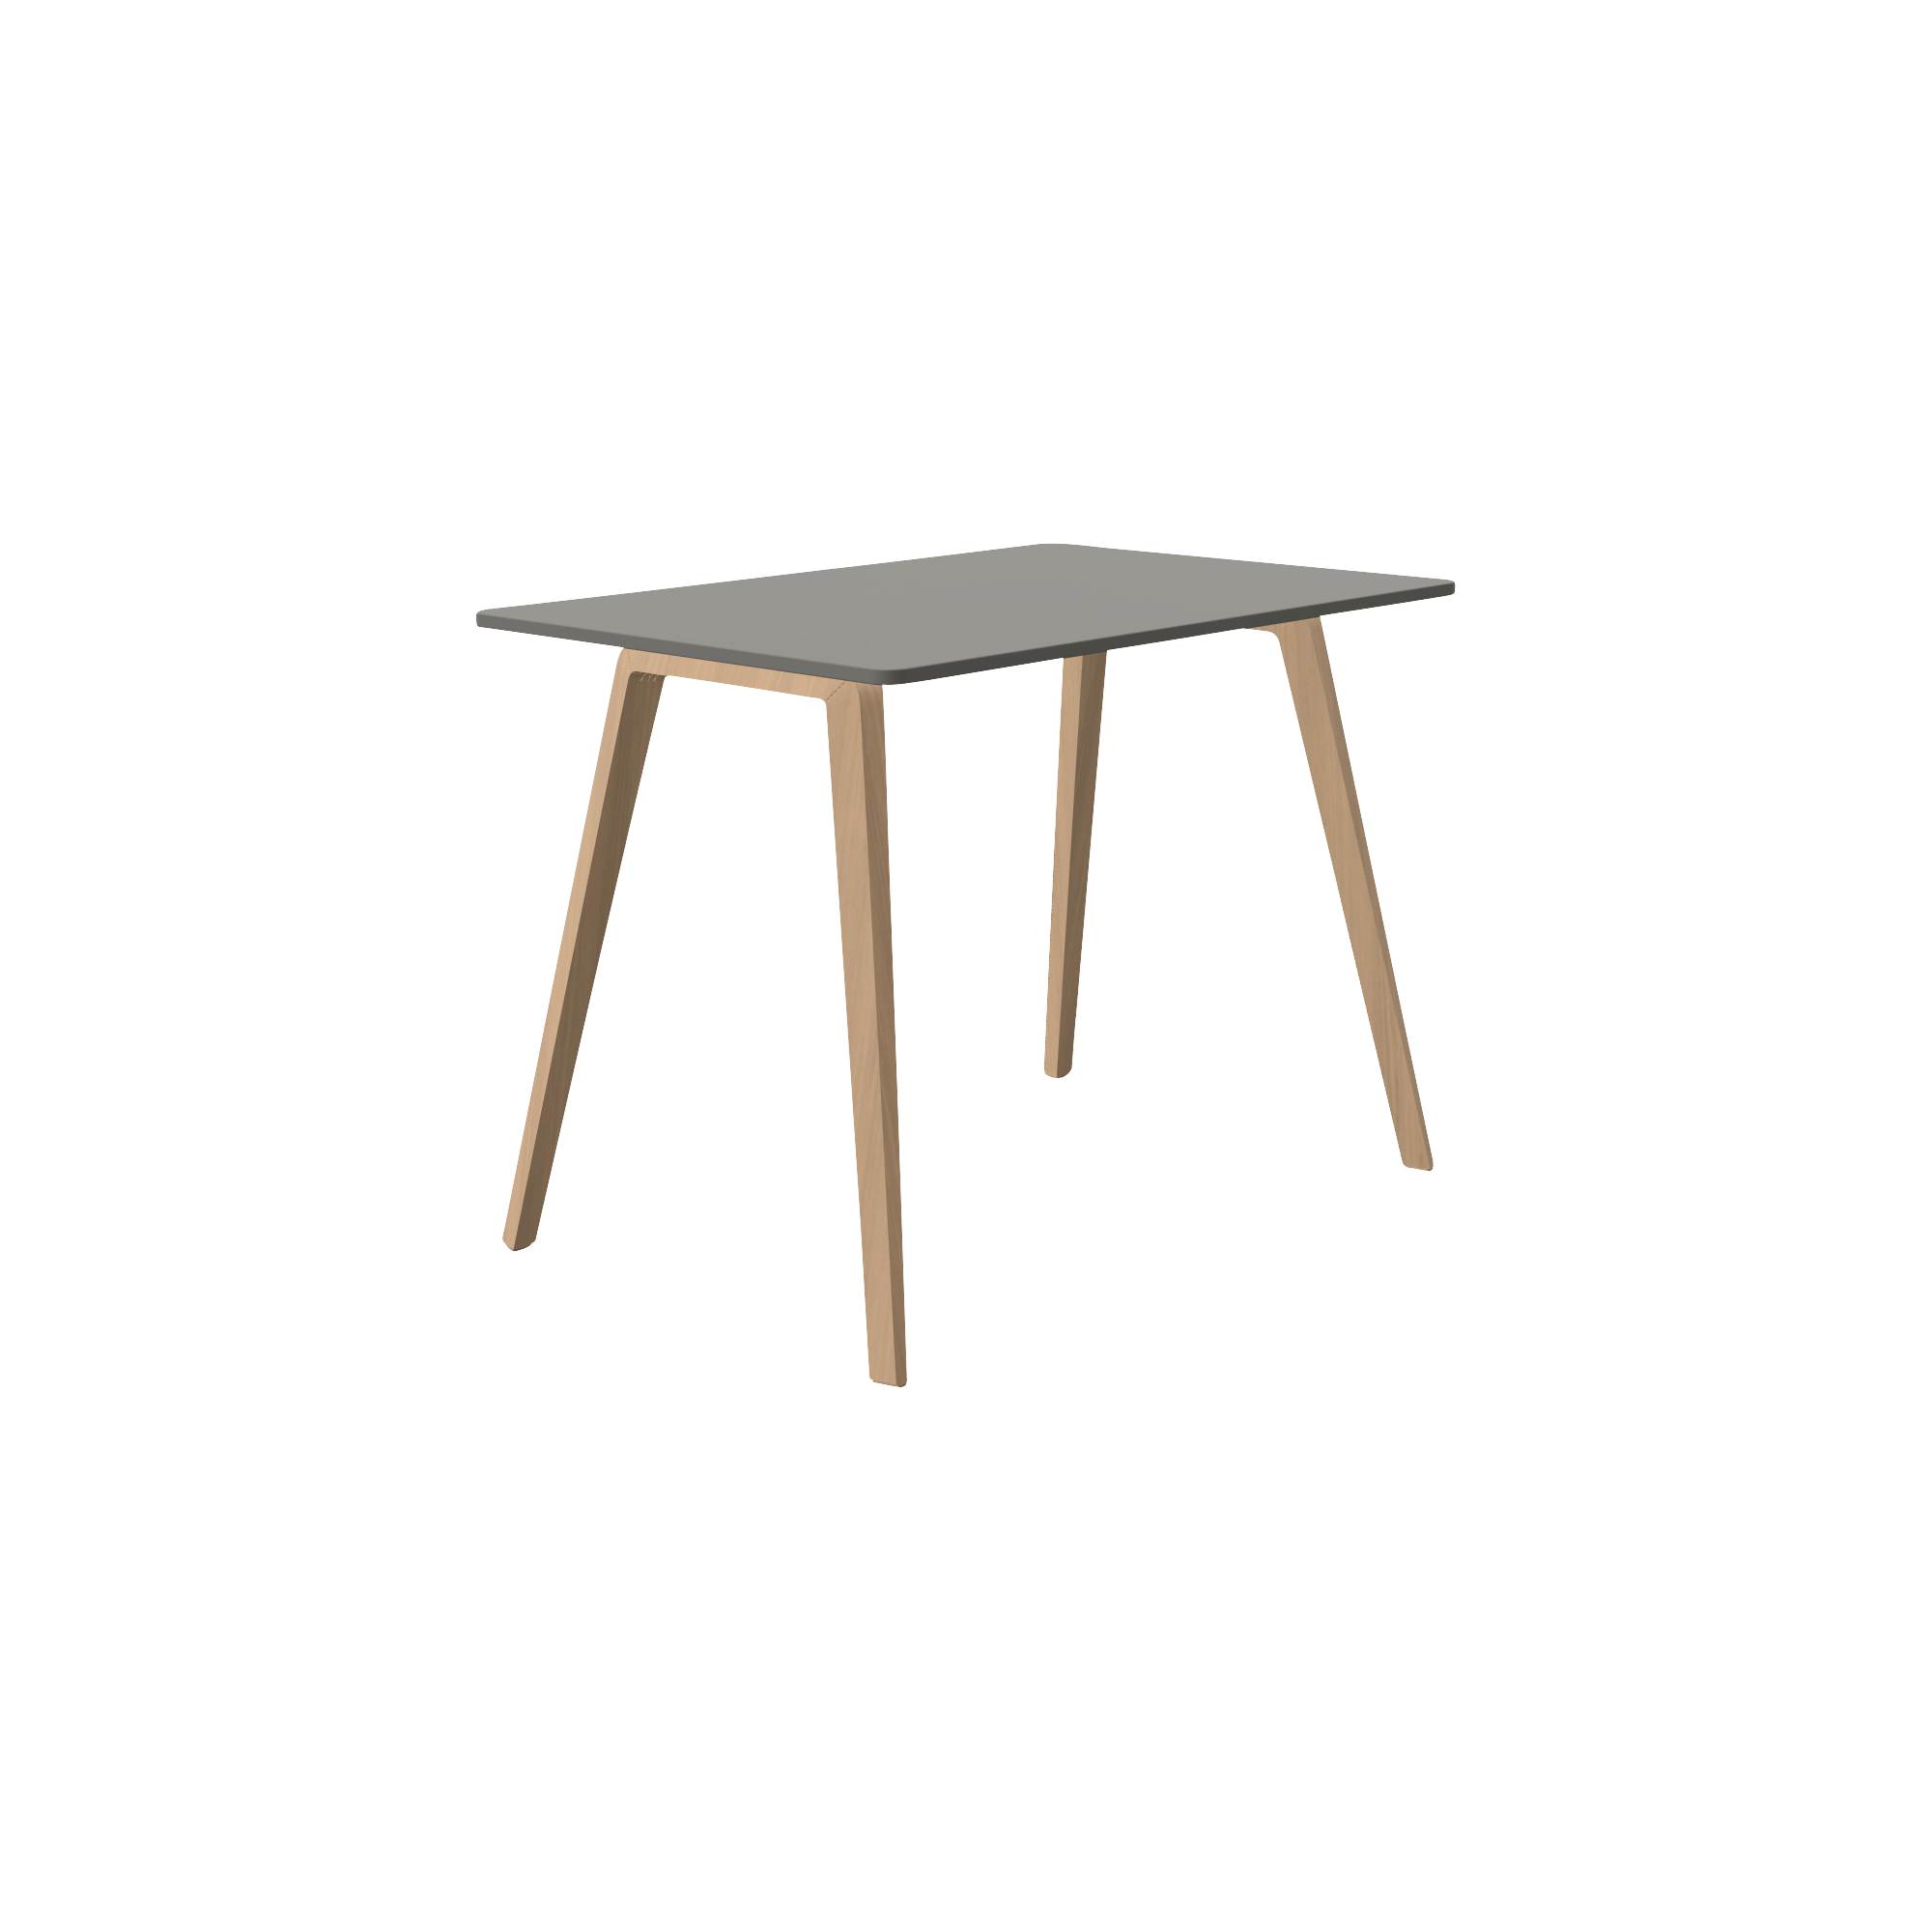 Grey, short rectangular table with 4 wooden legs